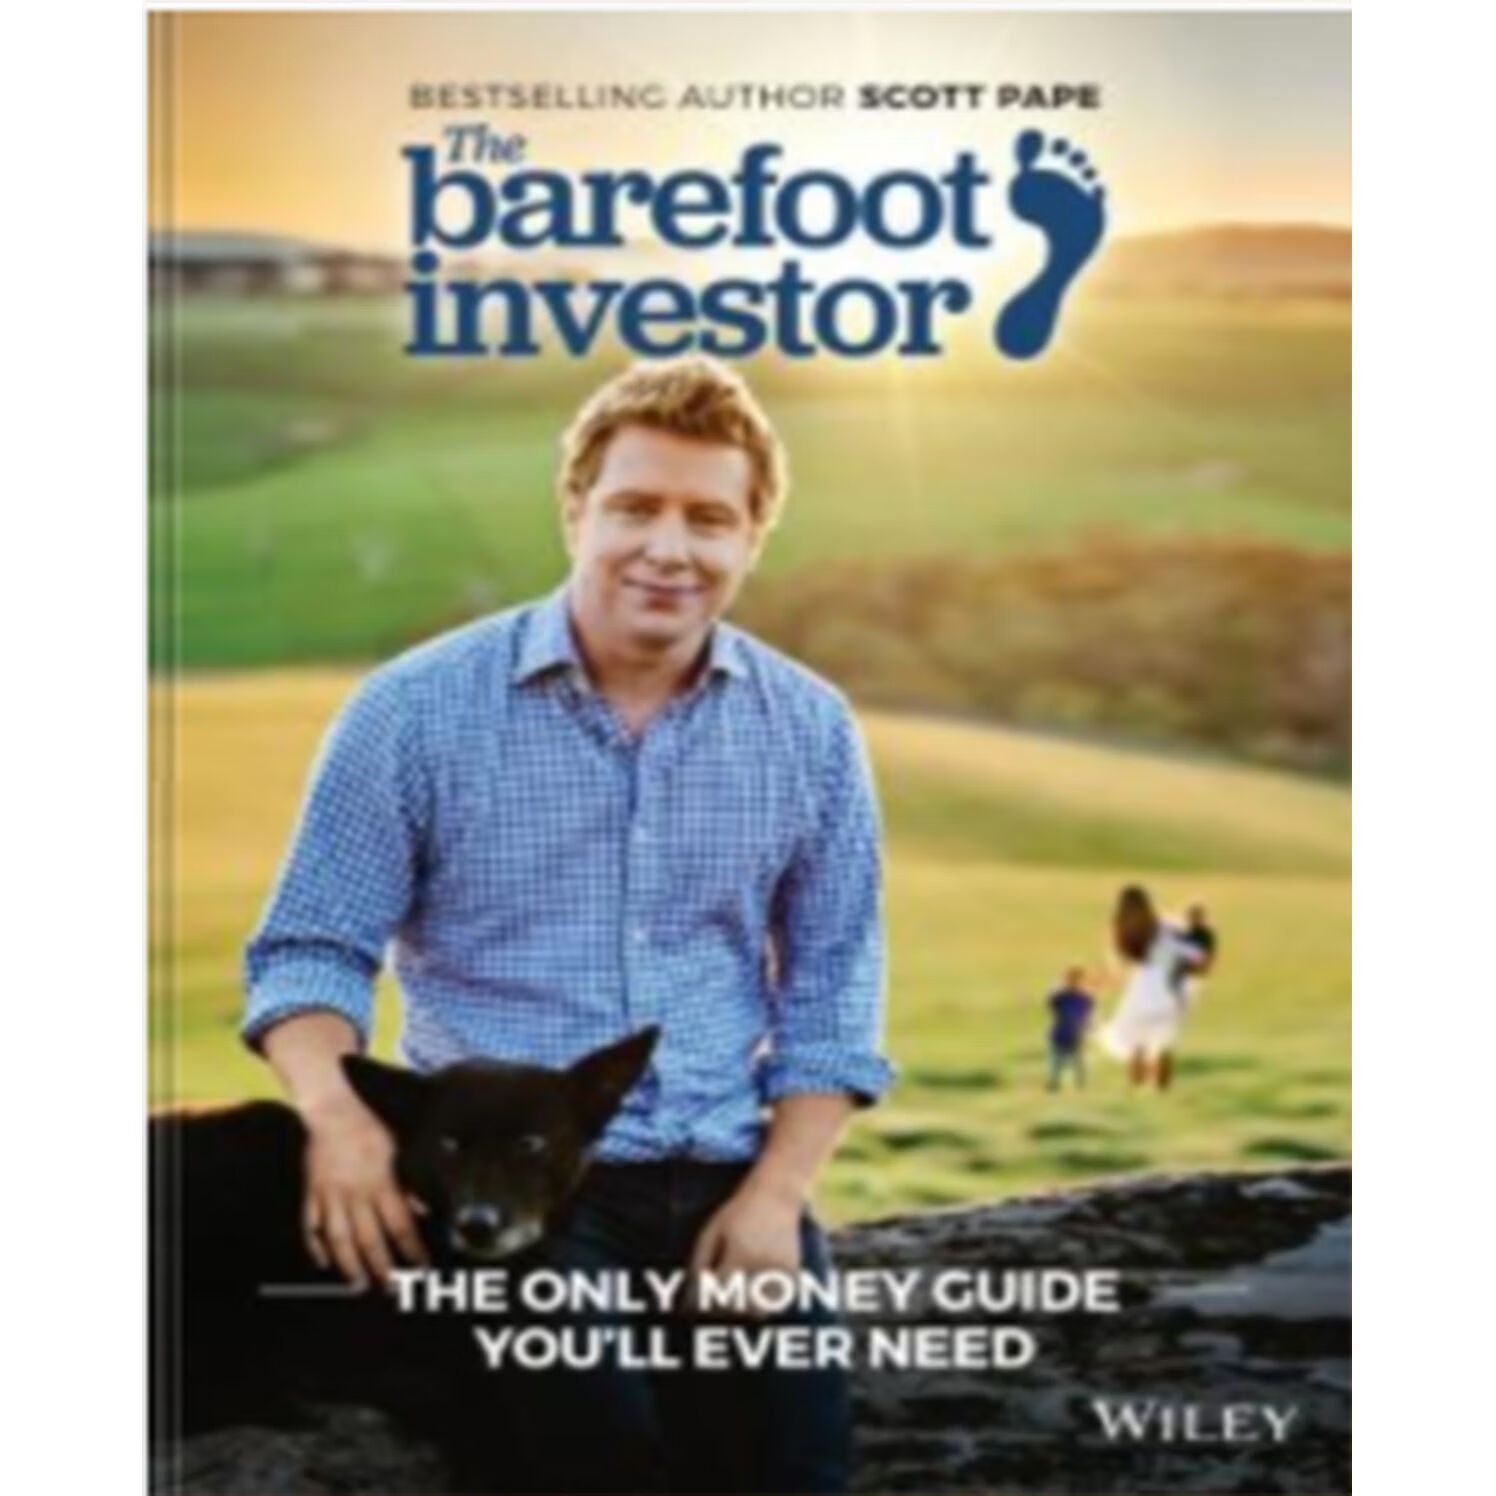 The Barefoot Investor: Steps to Financial Freedom